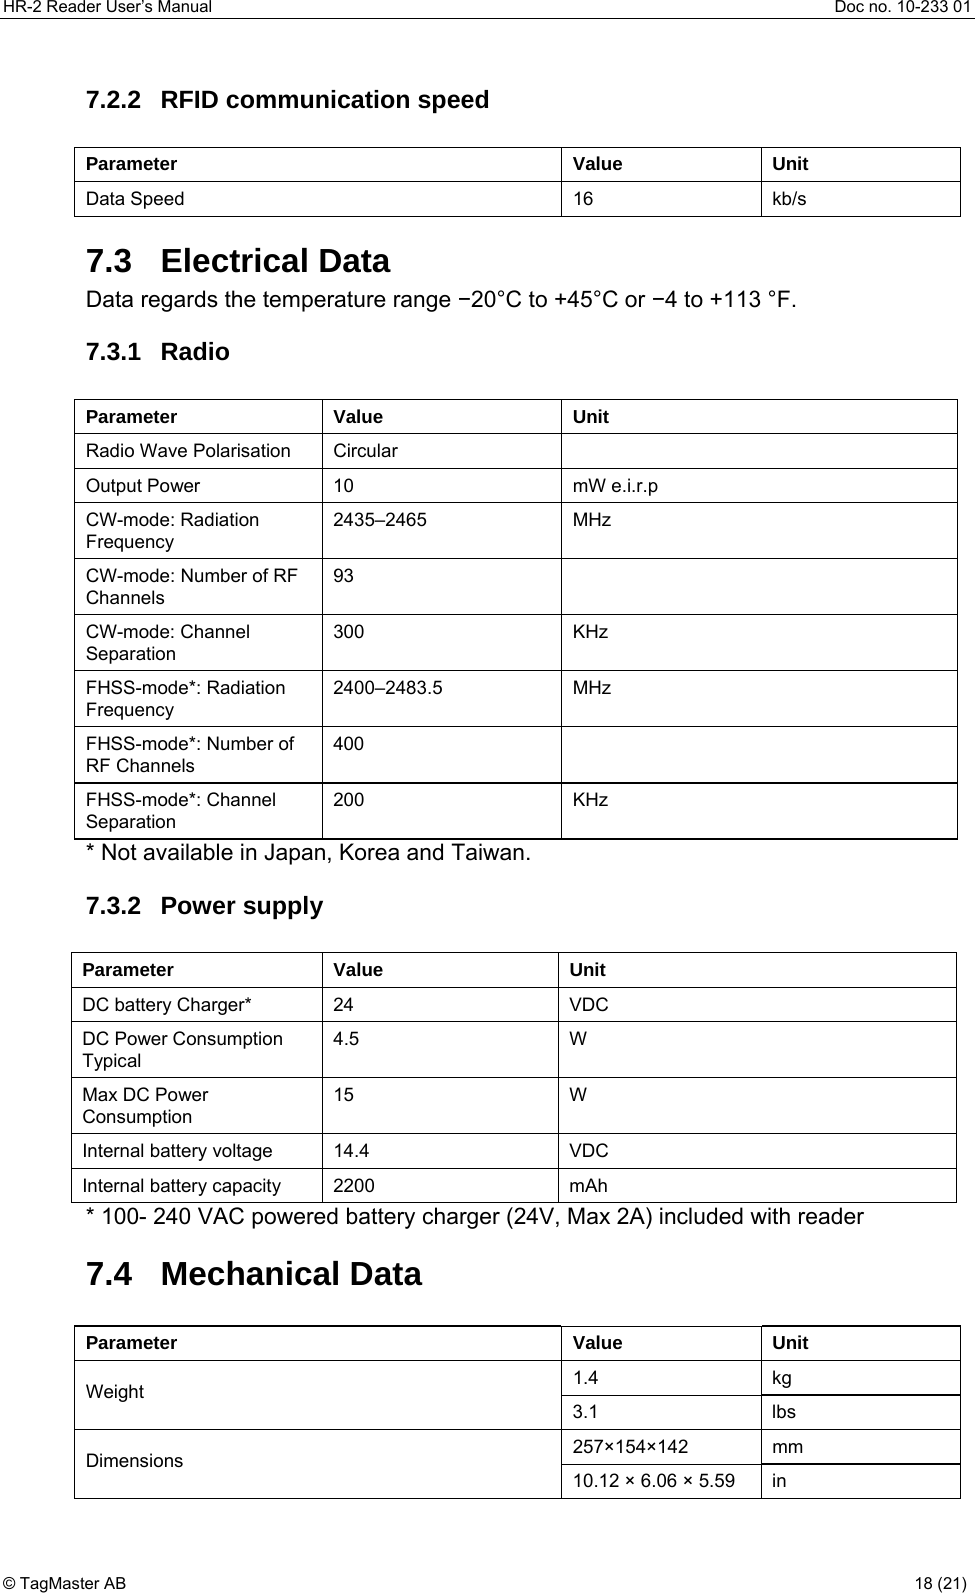 HR-2 Reader User’s Manual  Doc no. 10-233 01 © TagMaster AB  18 (21)   7.2.2  RFID communication speed  Parameter Value Unit Data Speed  16  kb/s 7.3 Electrical Data Data regards the temperature range −20°C to +45°C or −4 to +113 °F. 7.3.1 Radio  Parameter Value  Unit Radio Wave Polarisation  Circular   Output Power  10  mW e.i.r.p CW-mode: Radiation Frequency 2435–2465 MHz CW-mode: Number of RF Channels 93  CW-mode: Channel Separation 300 KHz FHSS-mode*: Radiation Frequency 2400–2483.5 MHz FHSS-mode*: Number of RF Channels 400  FHSS-mode*: Channel Separation 200 KHz * Not available in Japan, Korea and Taiwan. 7.3.2 Power supply  Parameter Value  Unit DC battery Charger*  24  VDC DC Power Consumption Typical 4.5 W Max DC Power Consumption 15 W Internal battery voltage  14.4  VDC Internal battery capacity  2200  mAh * 100- 240 VAC powered battery charger (24V, Max 2A) included with reader 7.4 Mechanical Data  Parameter Value Unit 1.4 kg Weight 3.1 lbs 257×154×142 mm Dimensions 10.12 × 6.06 × 5.59  in 